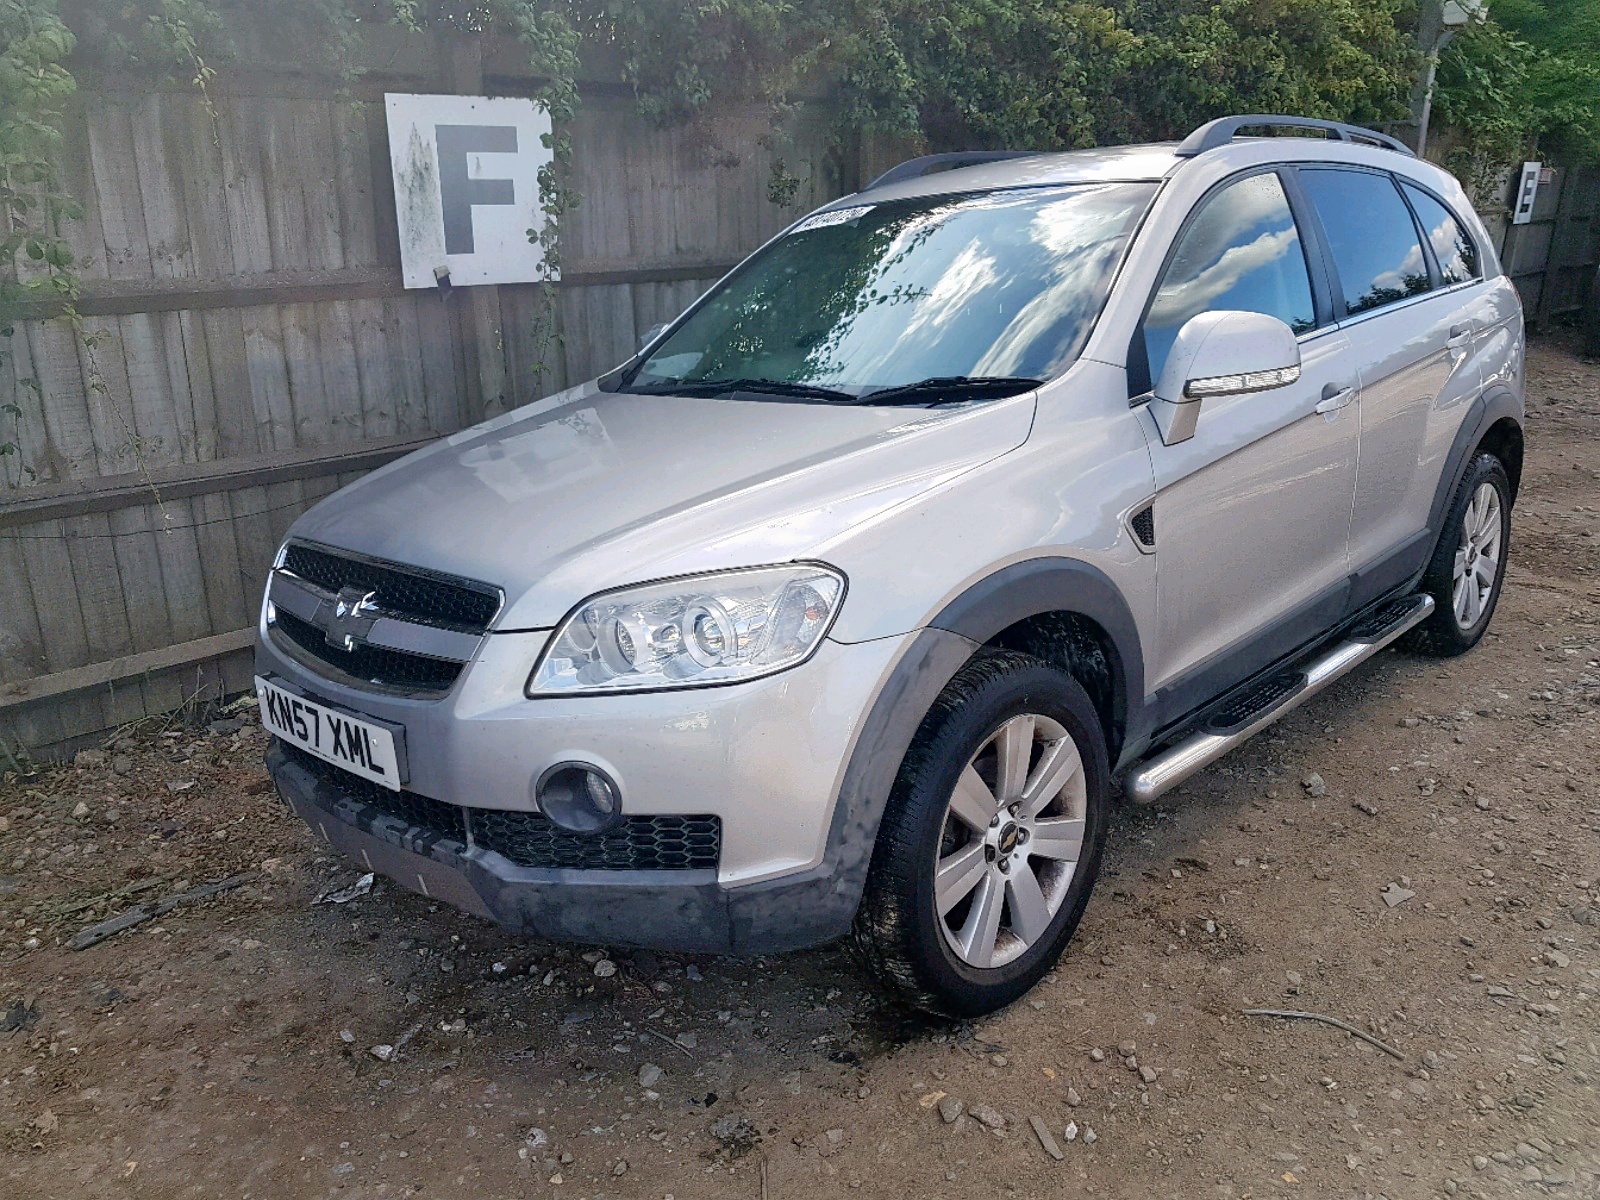 2007 CHEVROLET CAPTIVA LT for sale at Copart UK Salvage